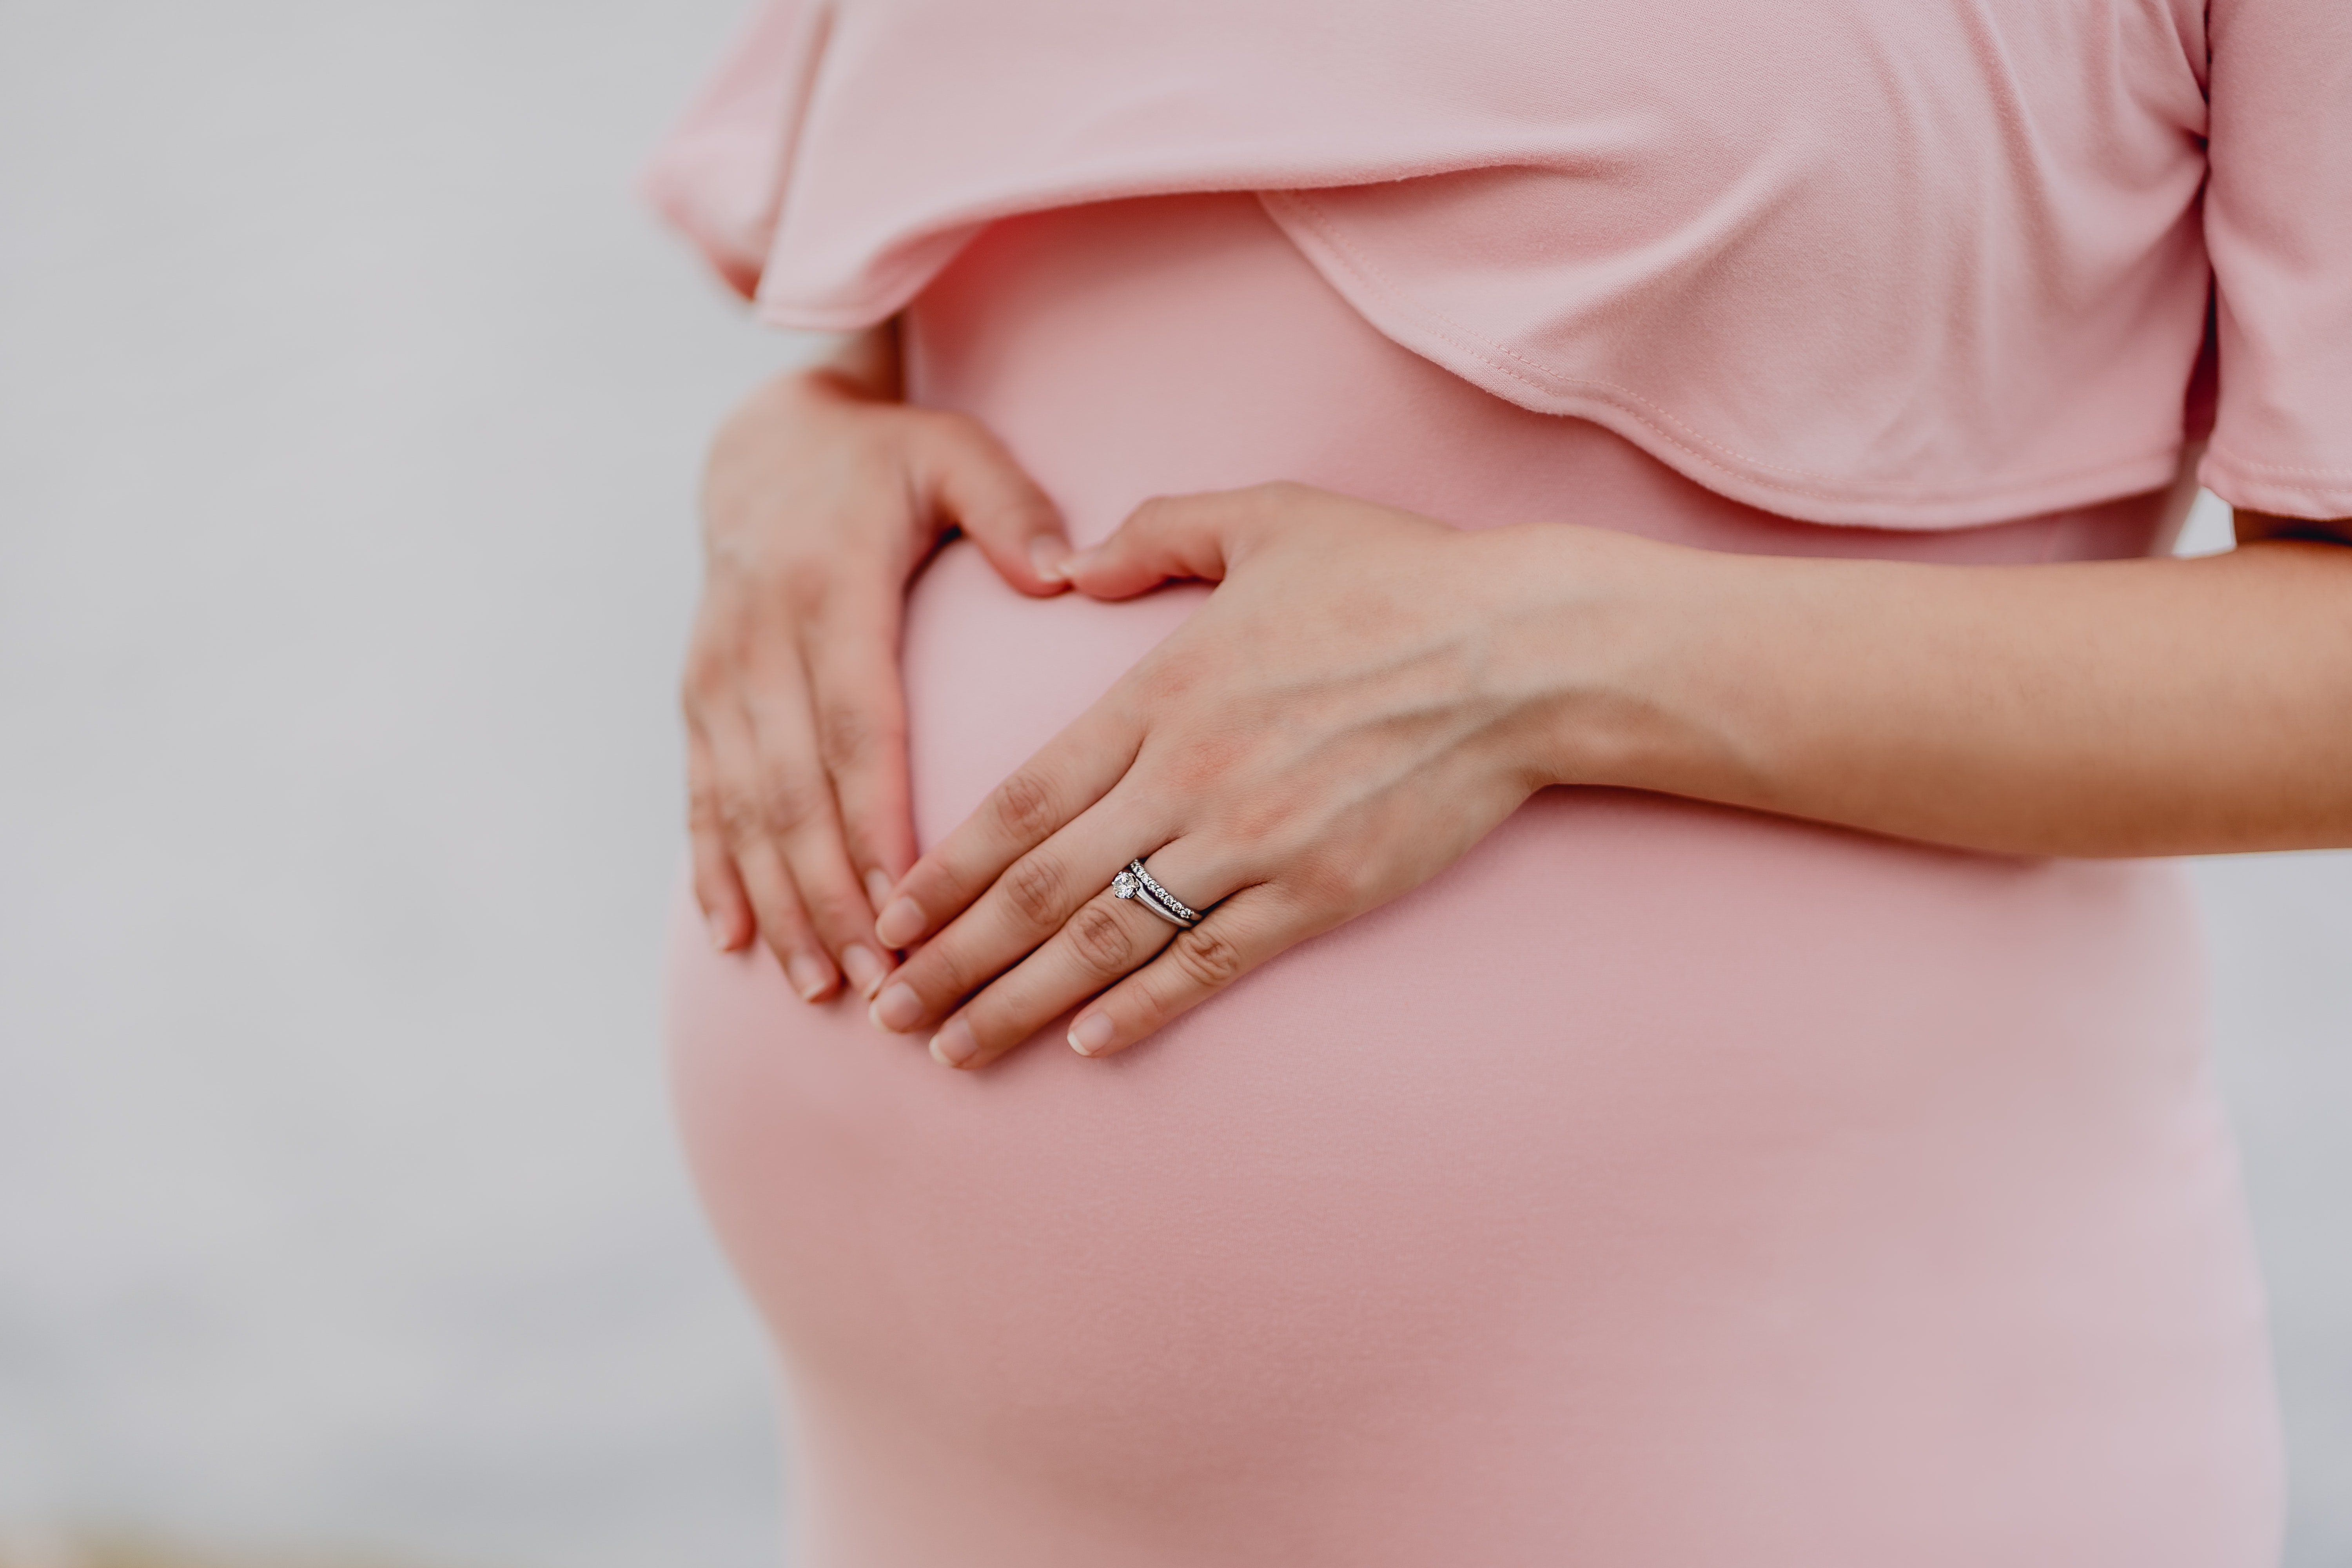 As weeks went by, it became impossible for Betty to hide her pregnancy from her parents | Source: Pexels